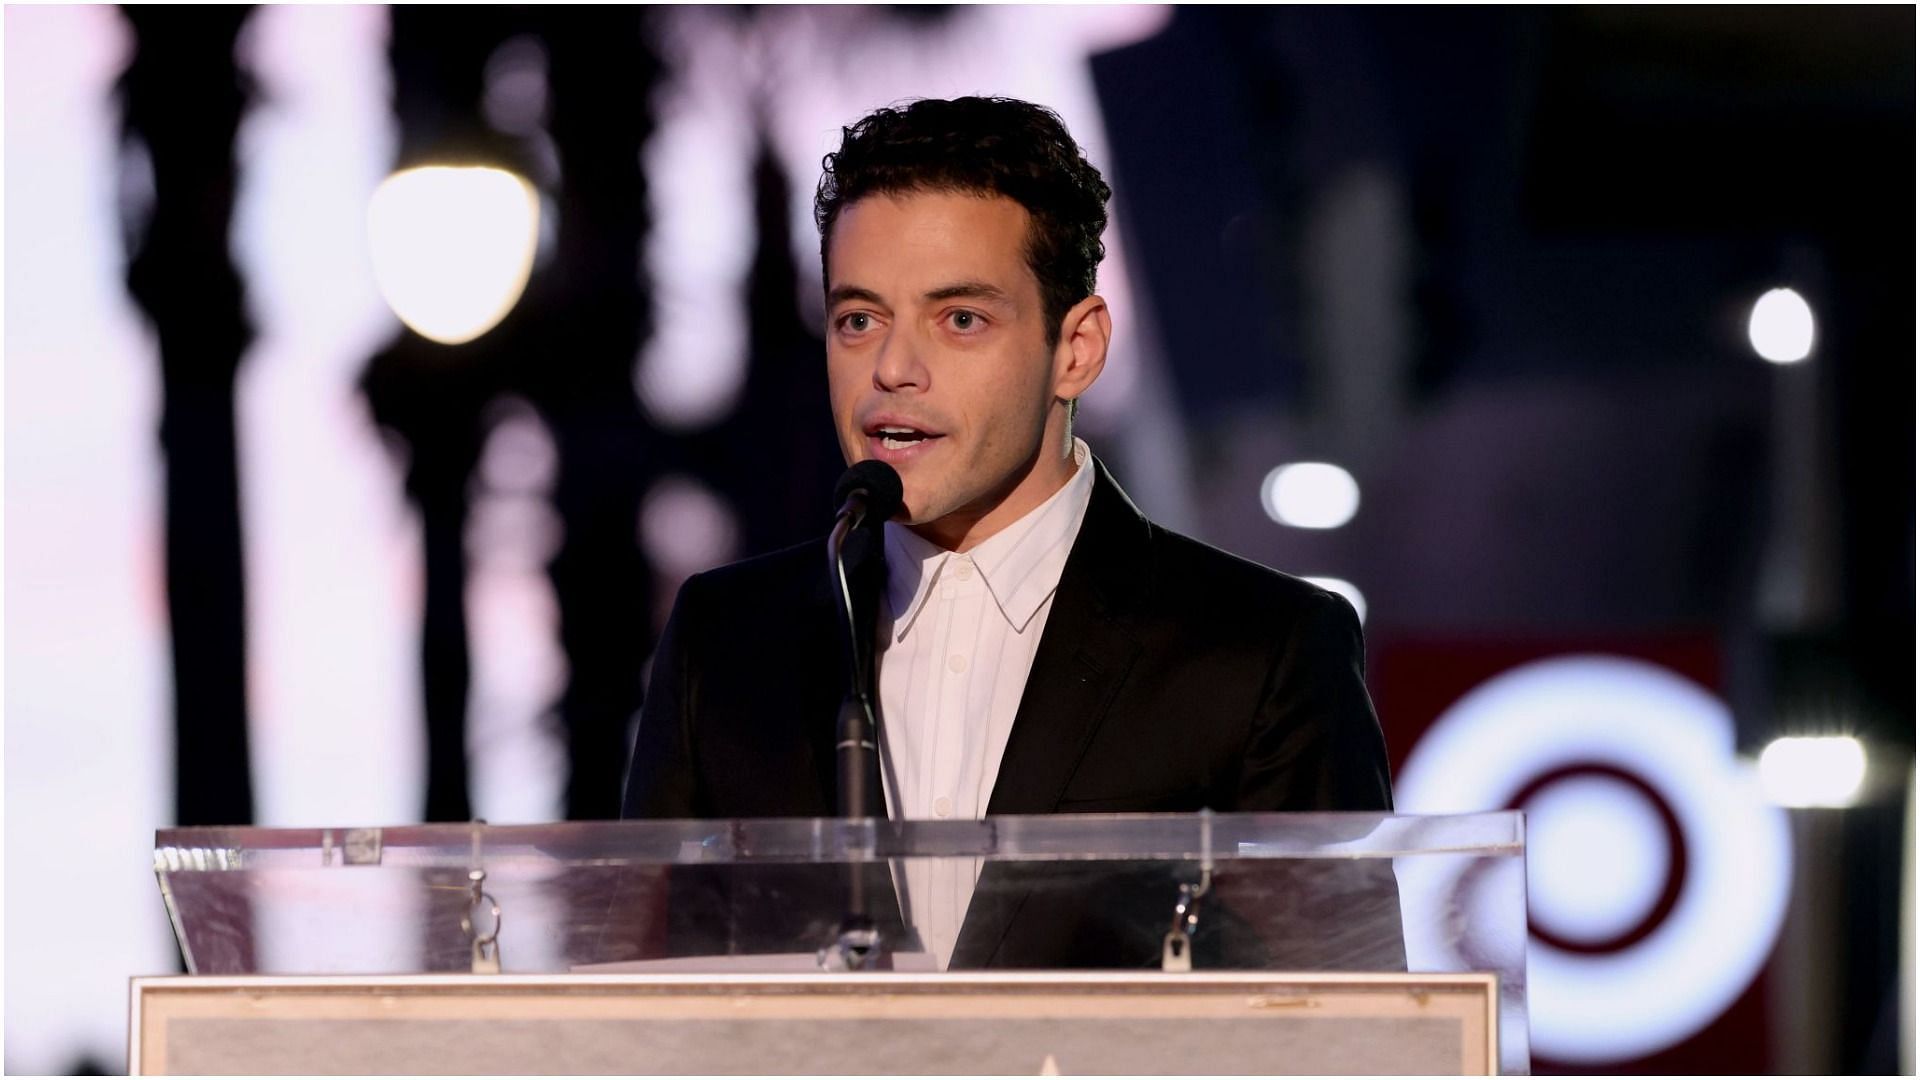 Rami Malek attends the Hollywood Walk of Fame Star Ceremony for Daniel Craig on October 06, 2021, in Hollywood, California. (Image via Getty Images)